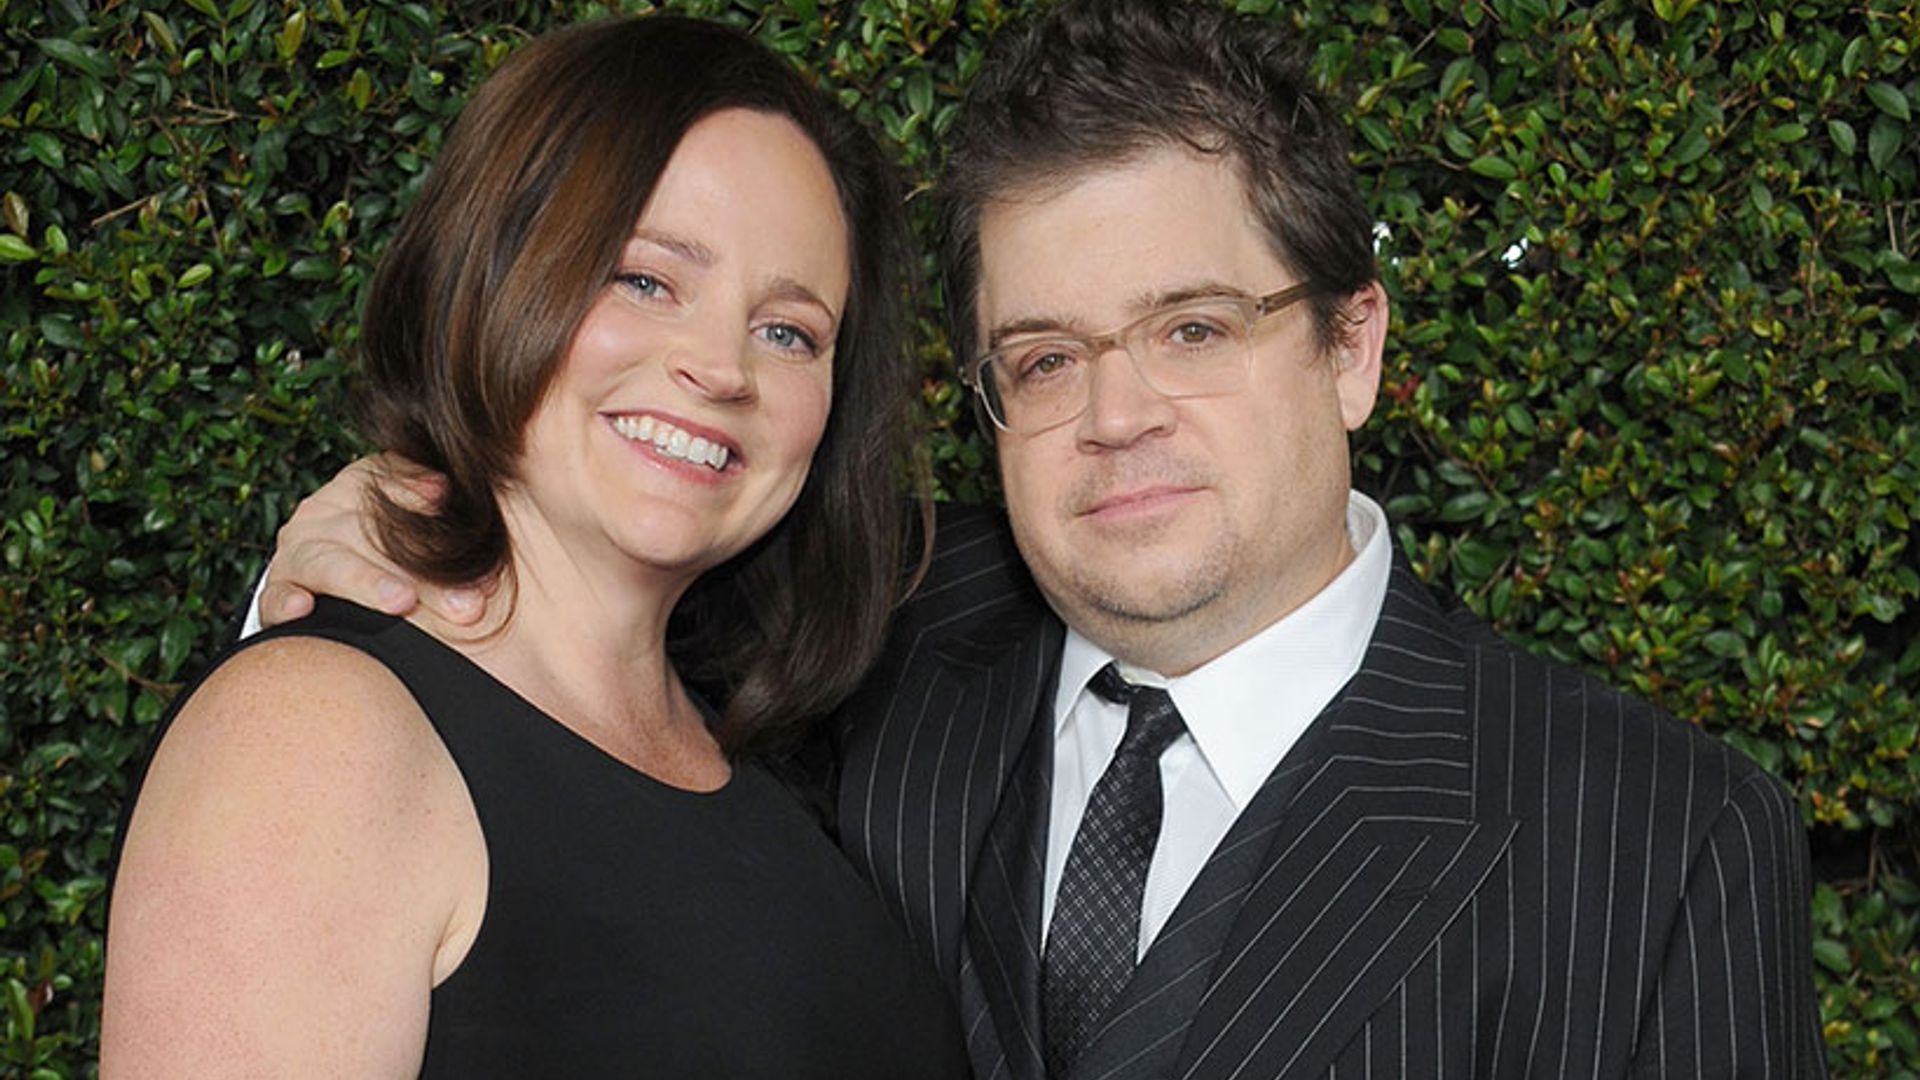 Patton Oswalt pays touching tribute to wife one year after unexpected death